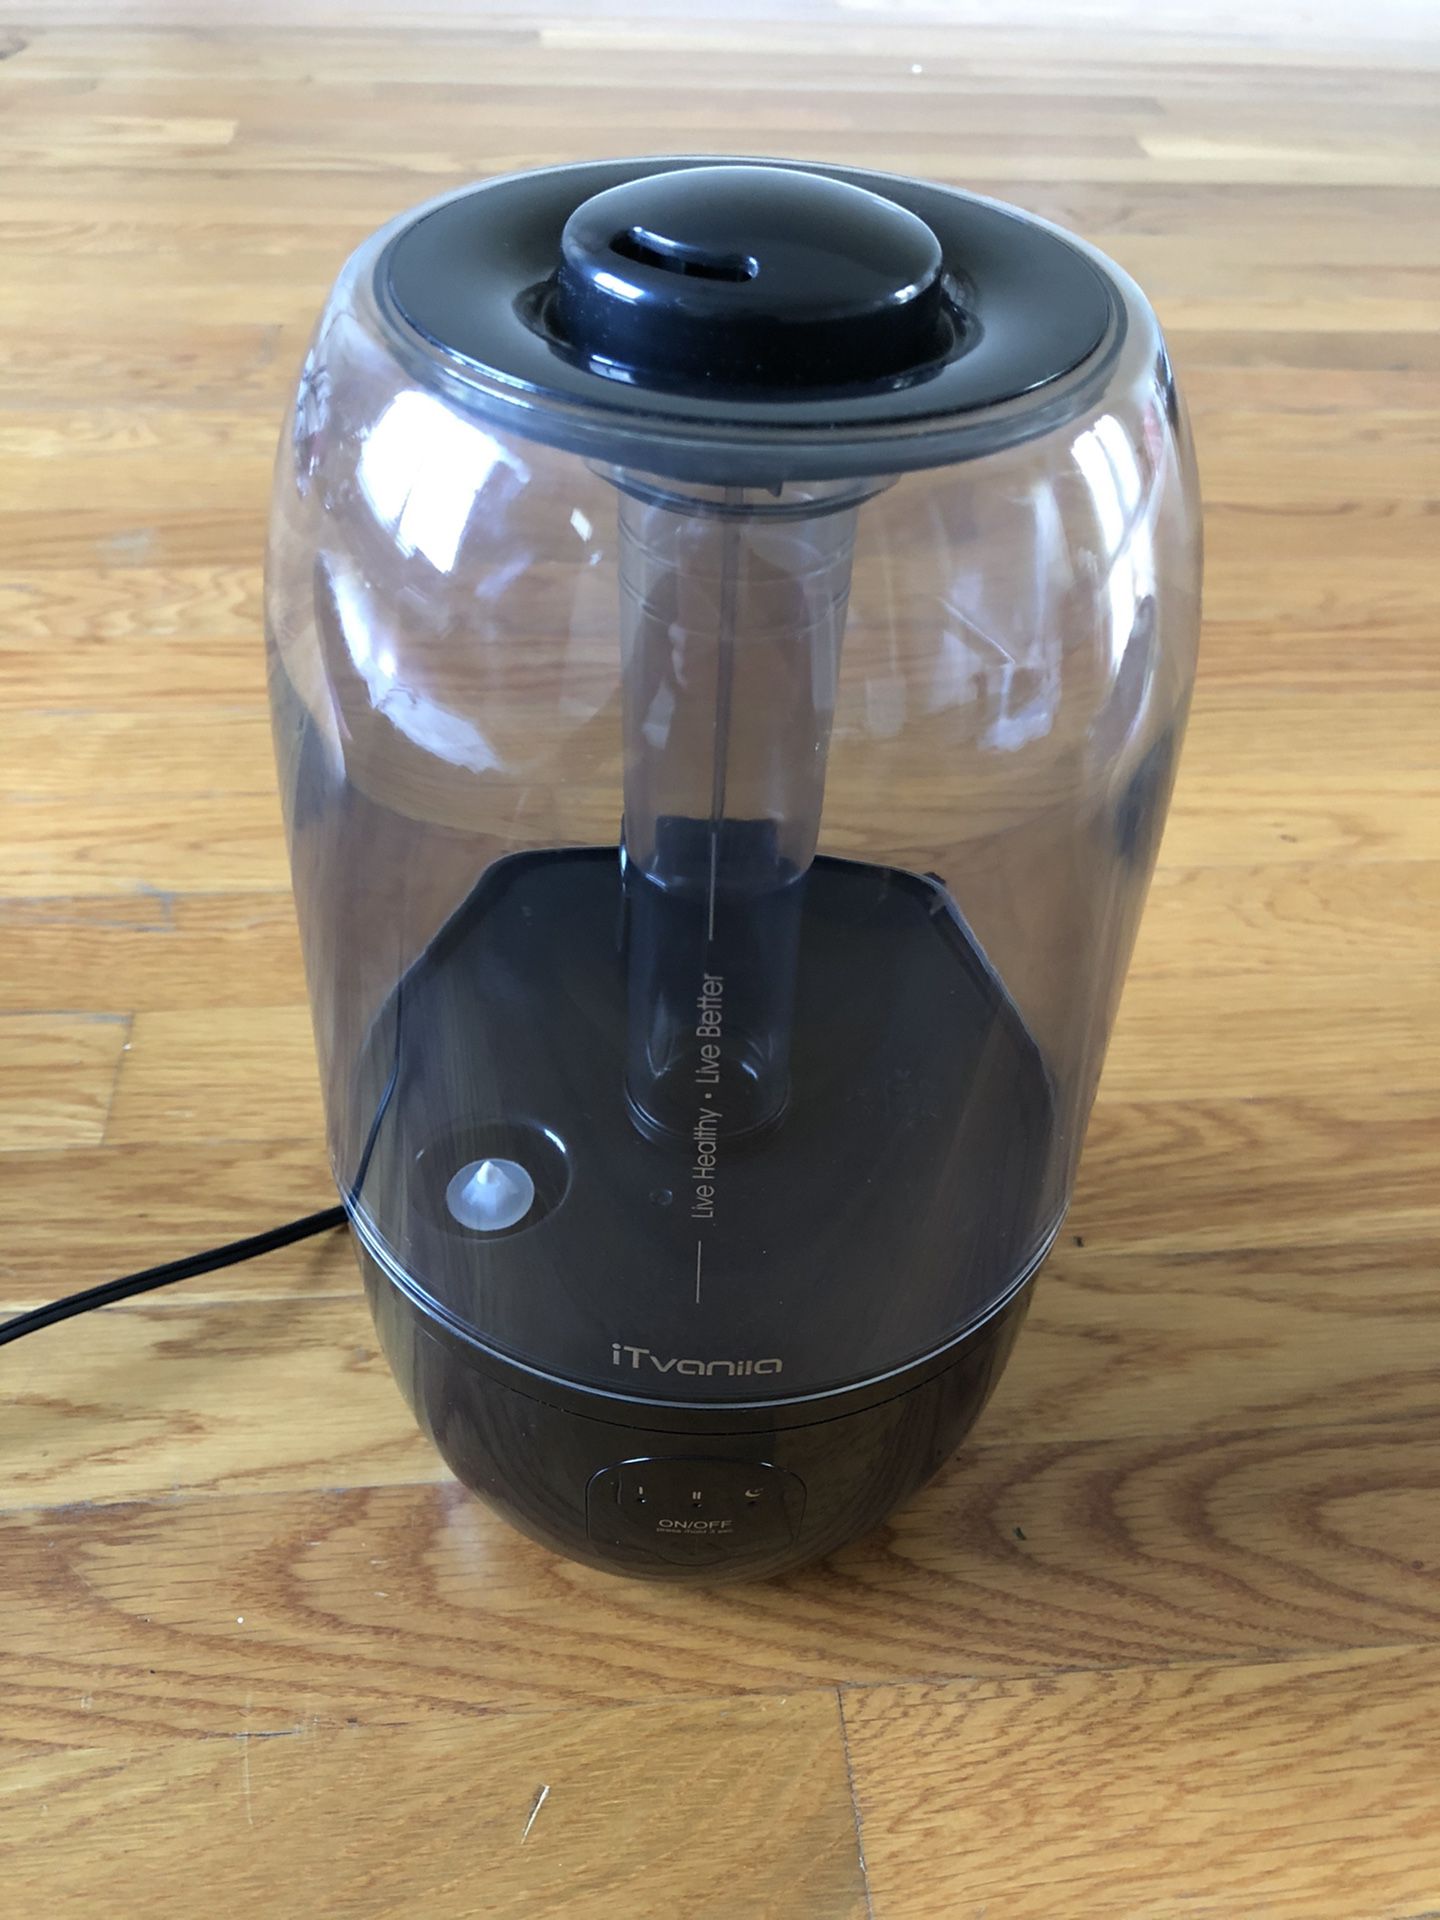 Humidifier for sale